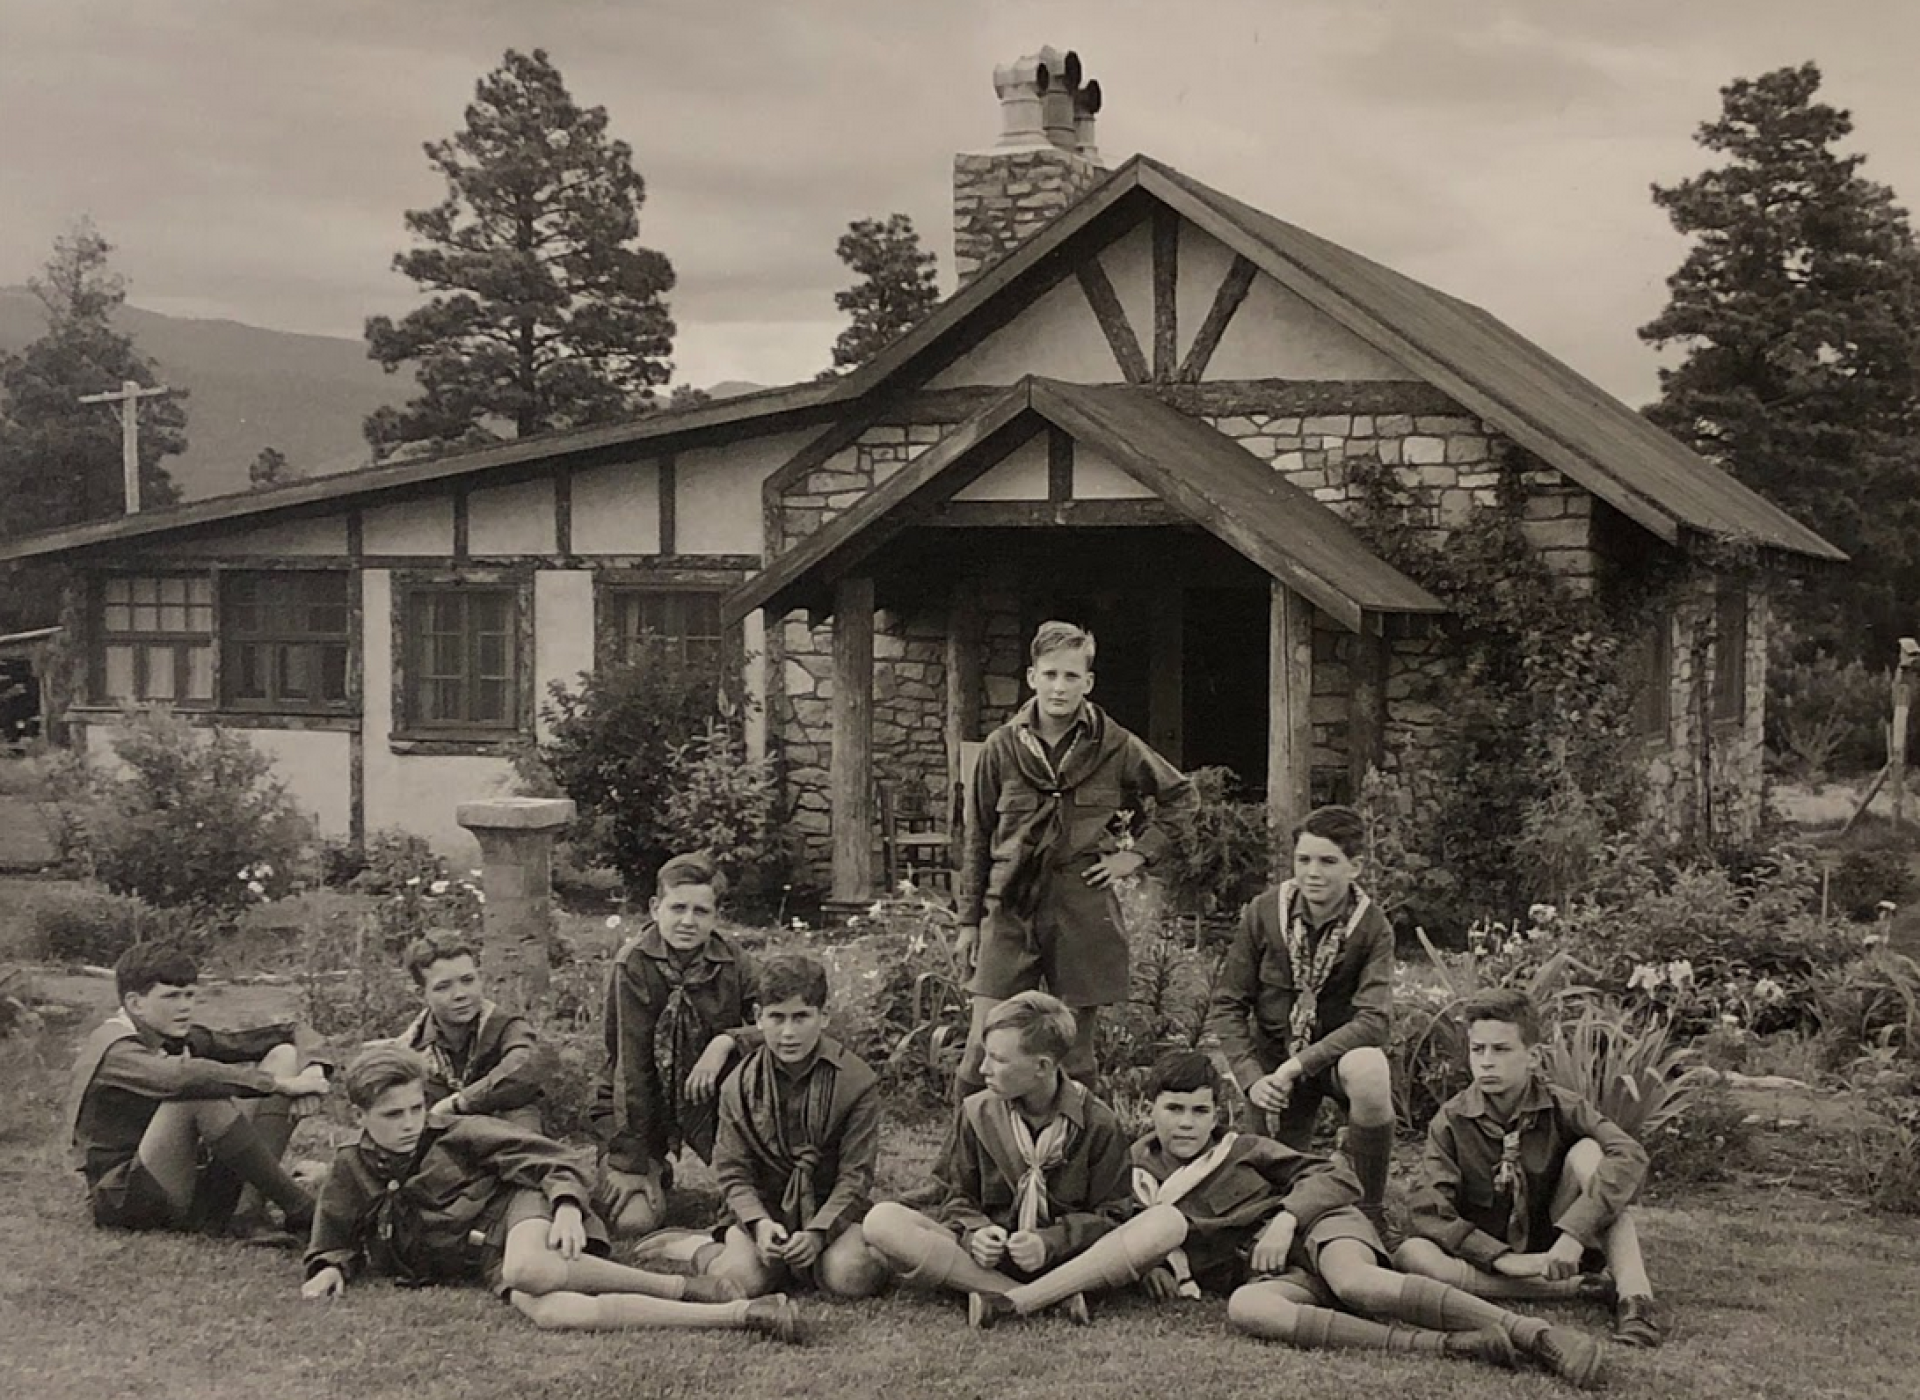 Students at the Los Alamos Ranch School in 1933, sitting in front of the house that Oppenheimer and his family occupied after Project Y was located there (from the Gilpin Collection, Los Alamos Historical Society Photo Archives)